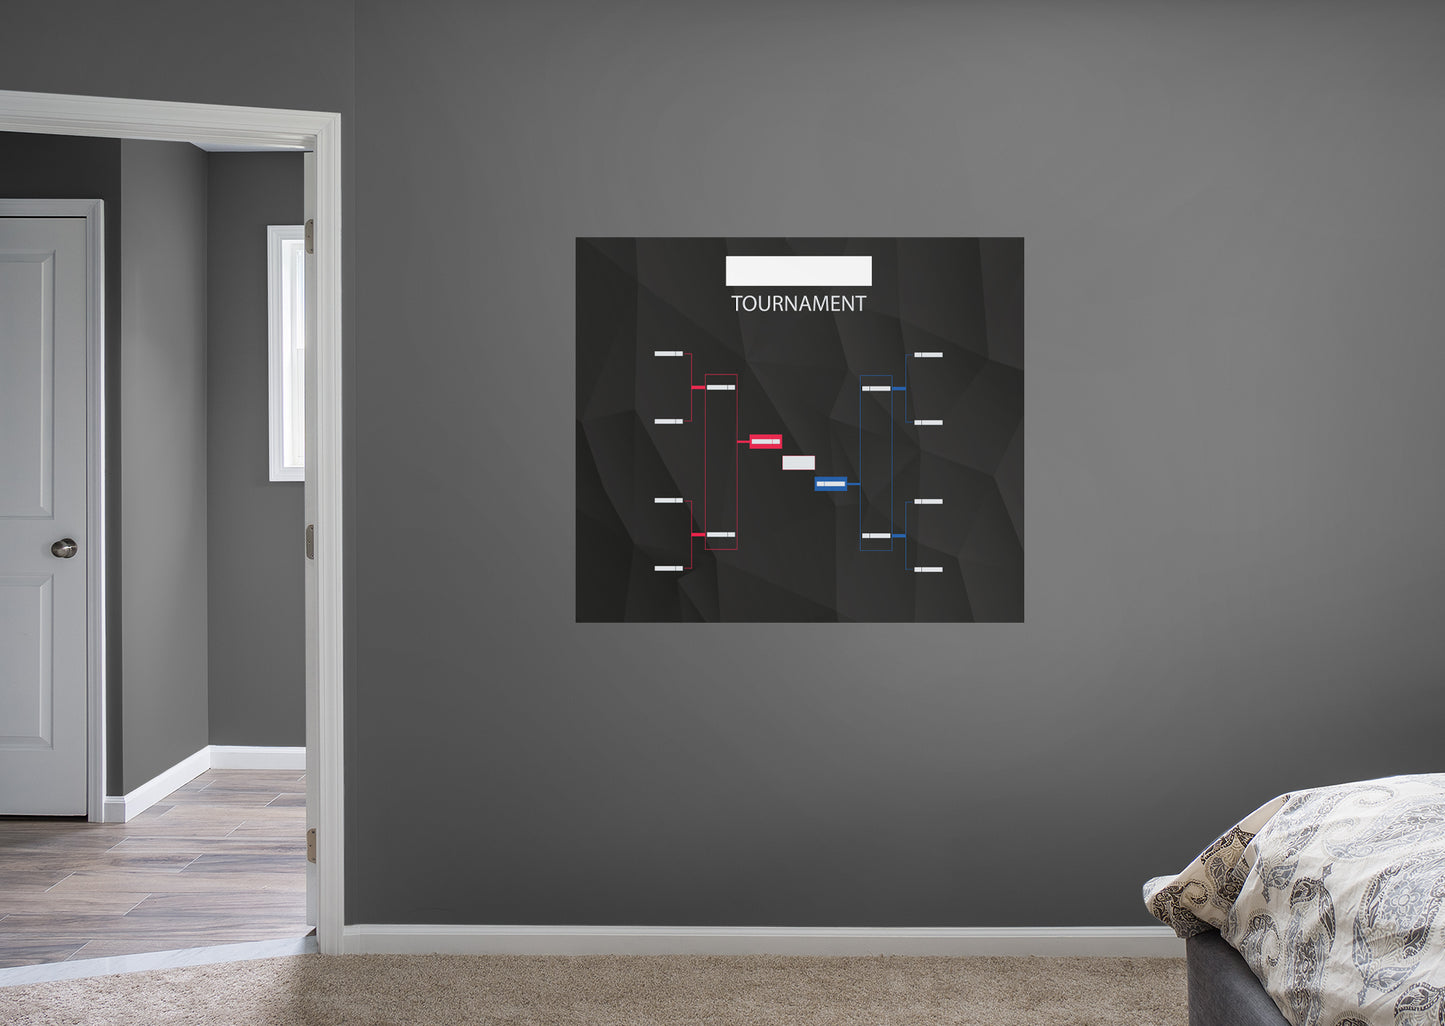 8 Team Dark Brackets Dry Erase        -   Removable Wall   Adhesive Decal